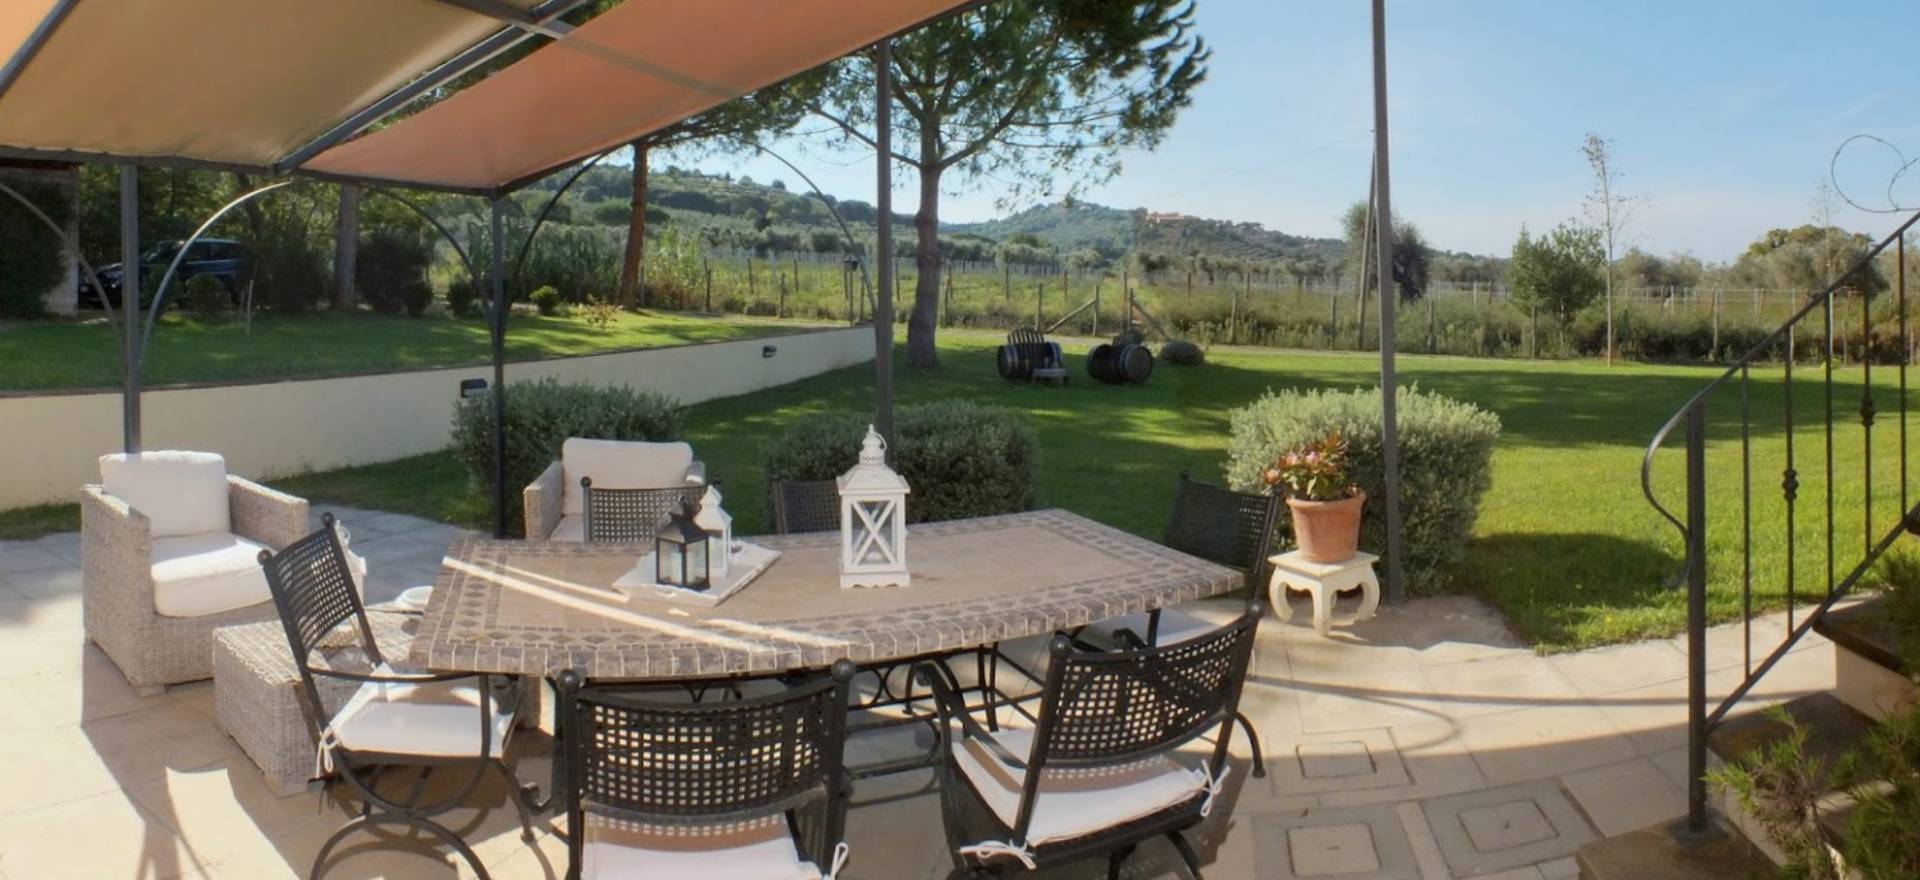 Agriturismo Tuscany Agriturismo in the hart of the Super-Tuscan wine region